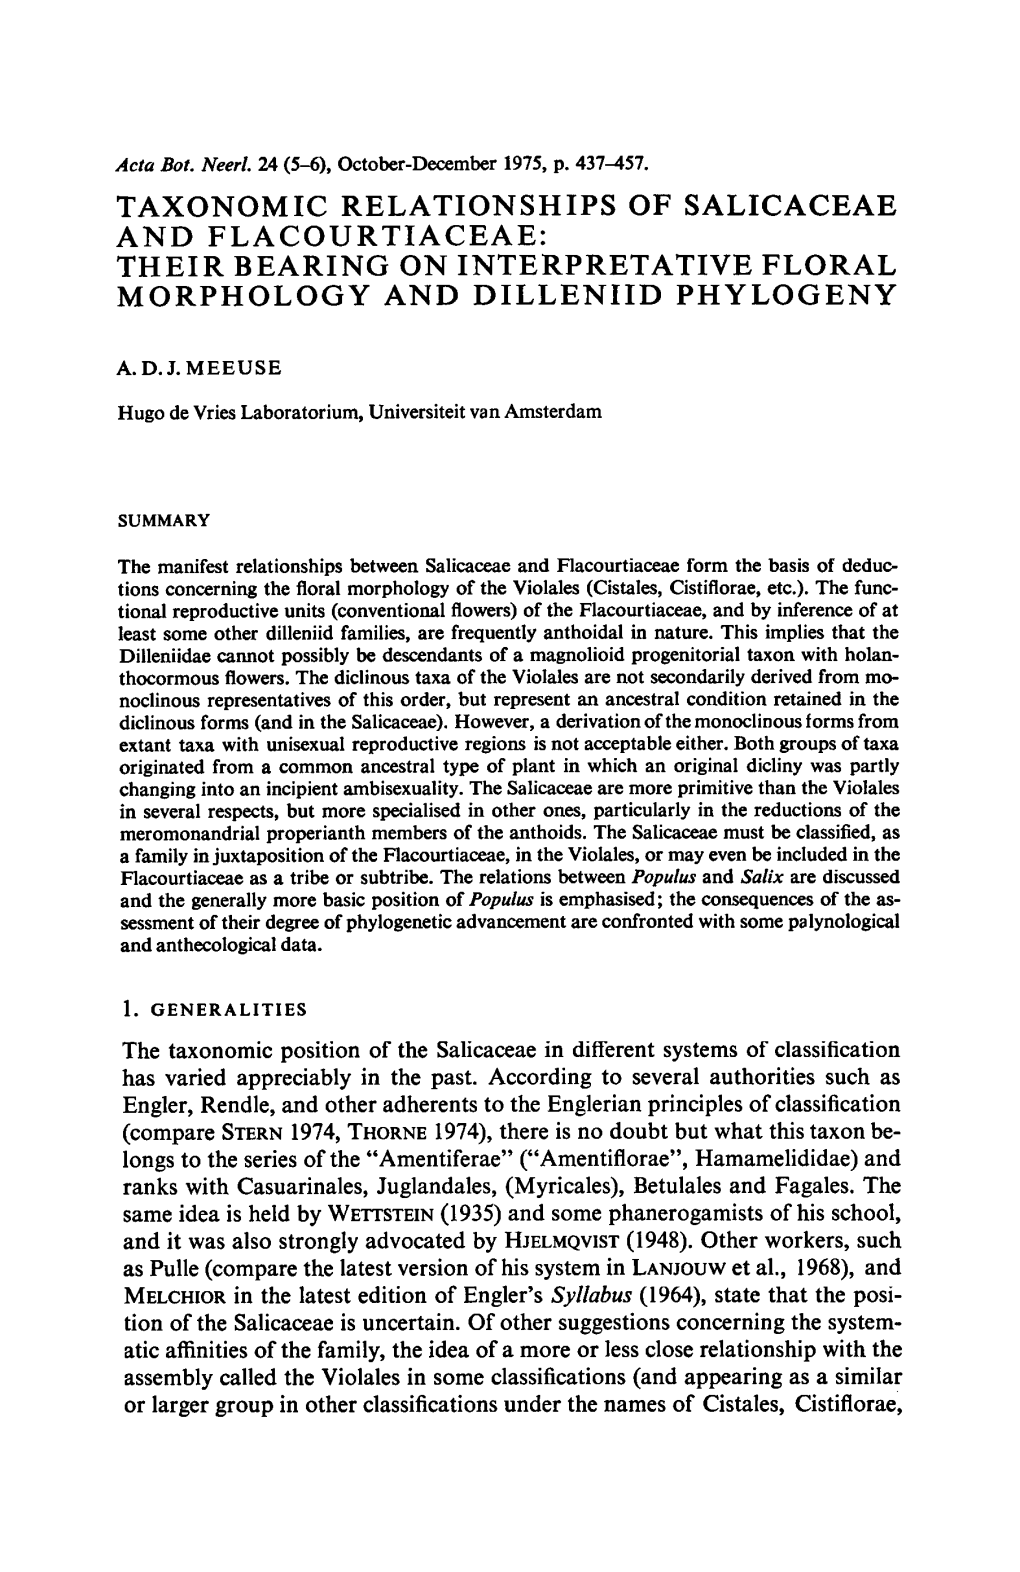 Taxonomic Relationships of Salicaceae Flacourtiaceae: Their